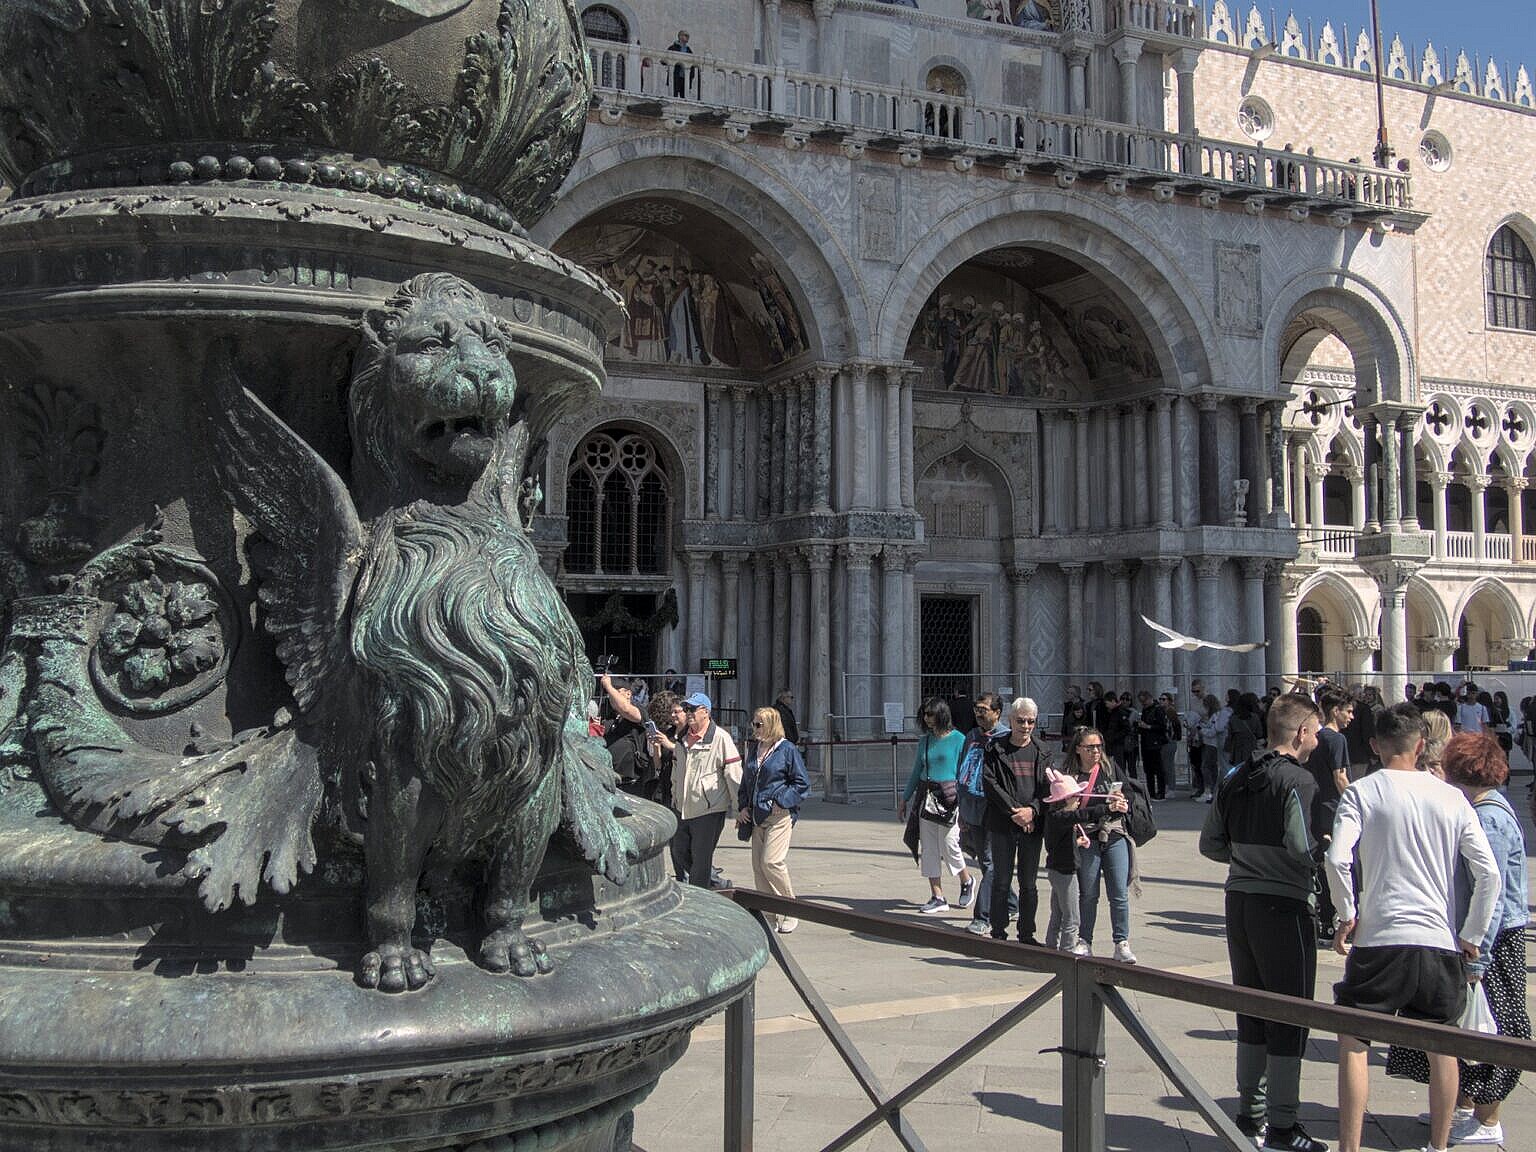 Winged lion of St Mark in moeca on a flagpole base in Piazza San Marco